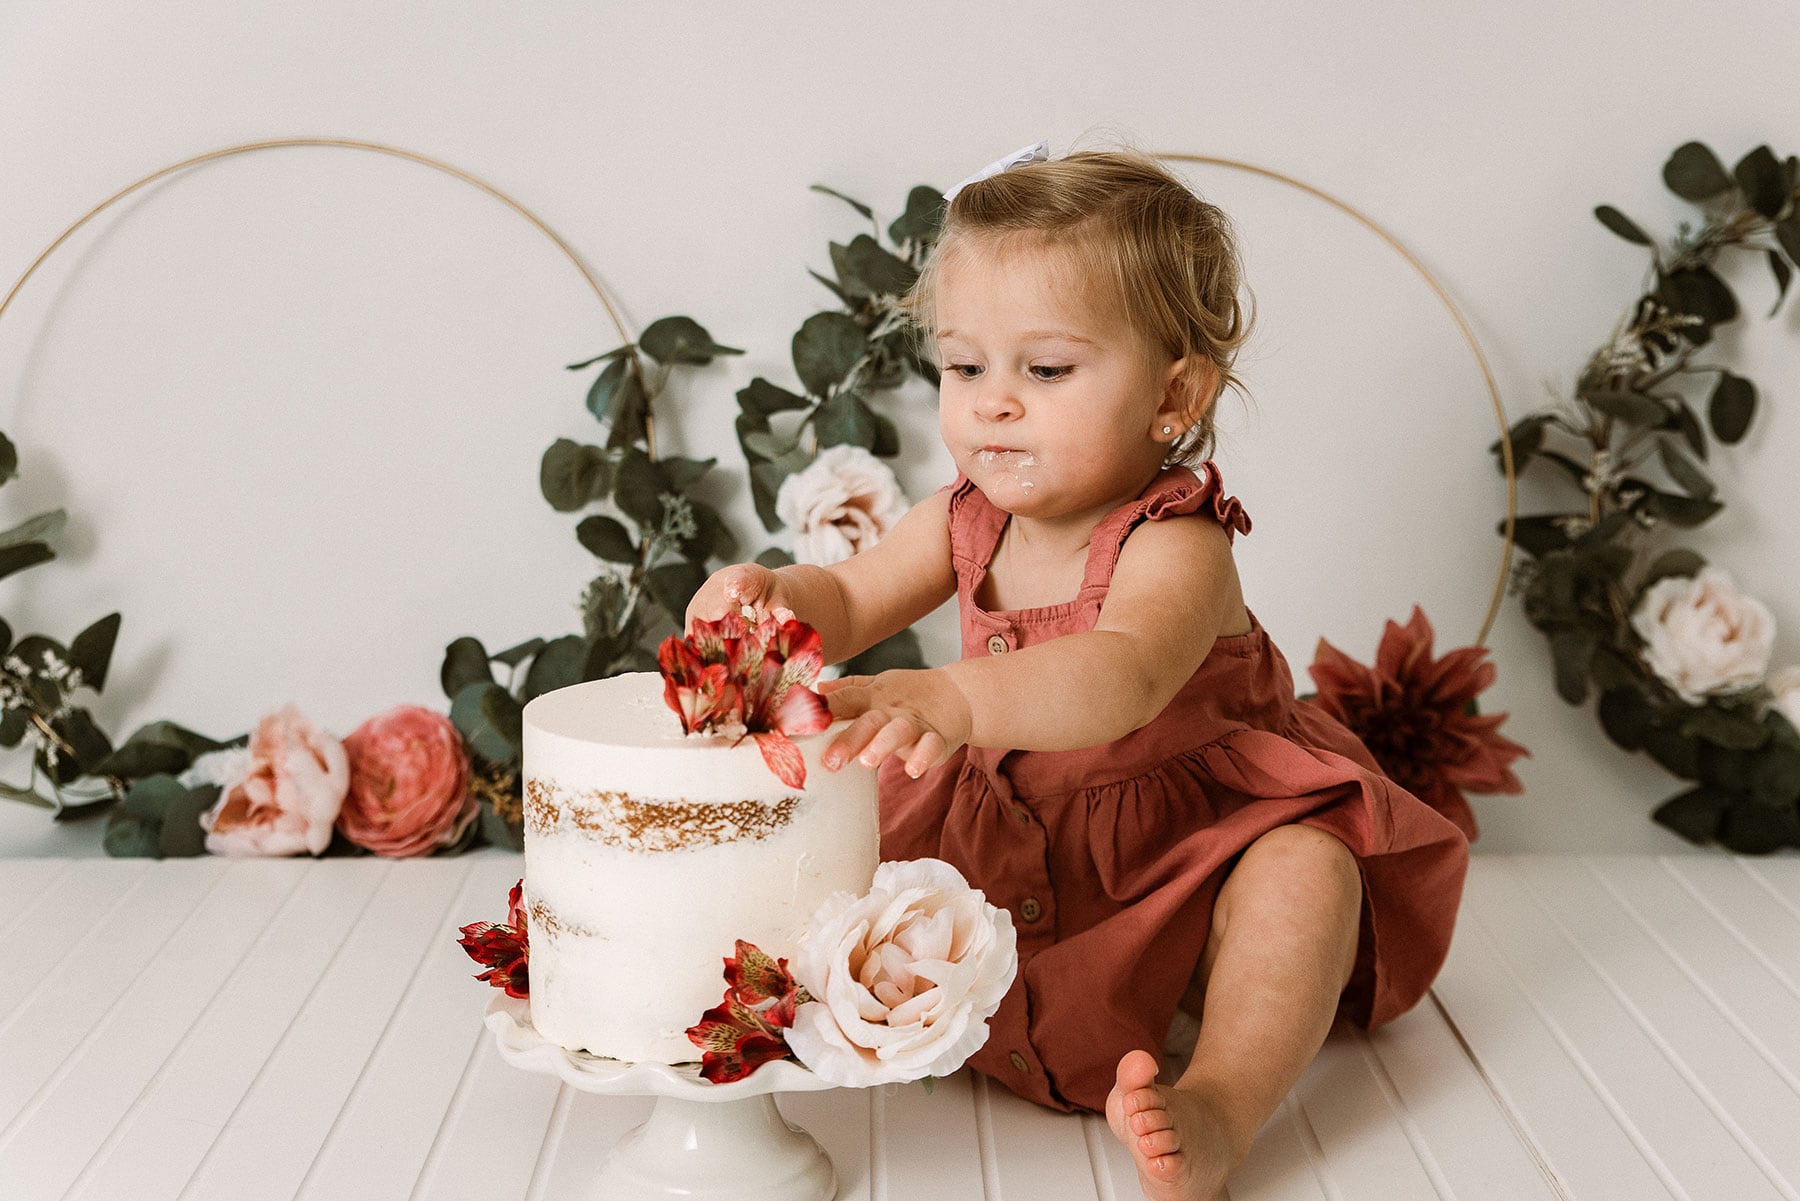 Picture of a baby with a white cake and frosting on her face